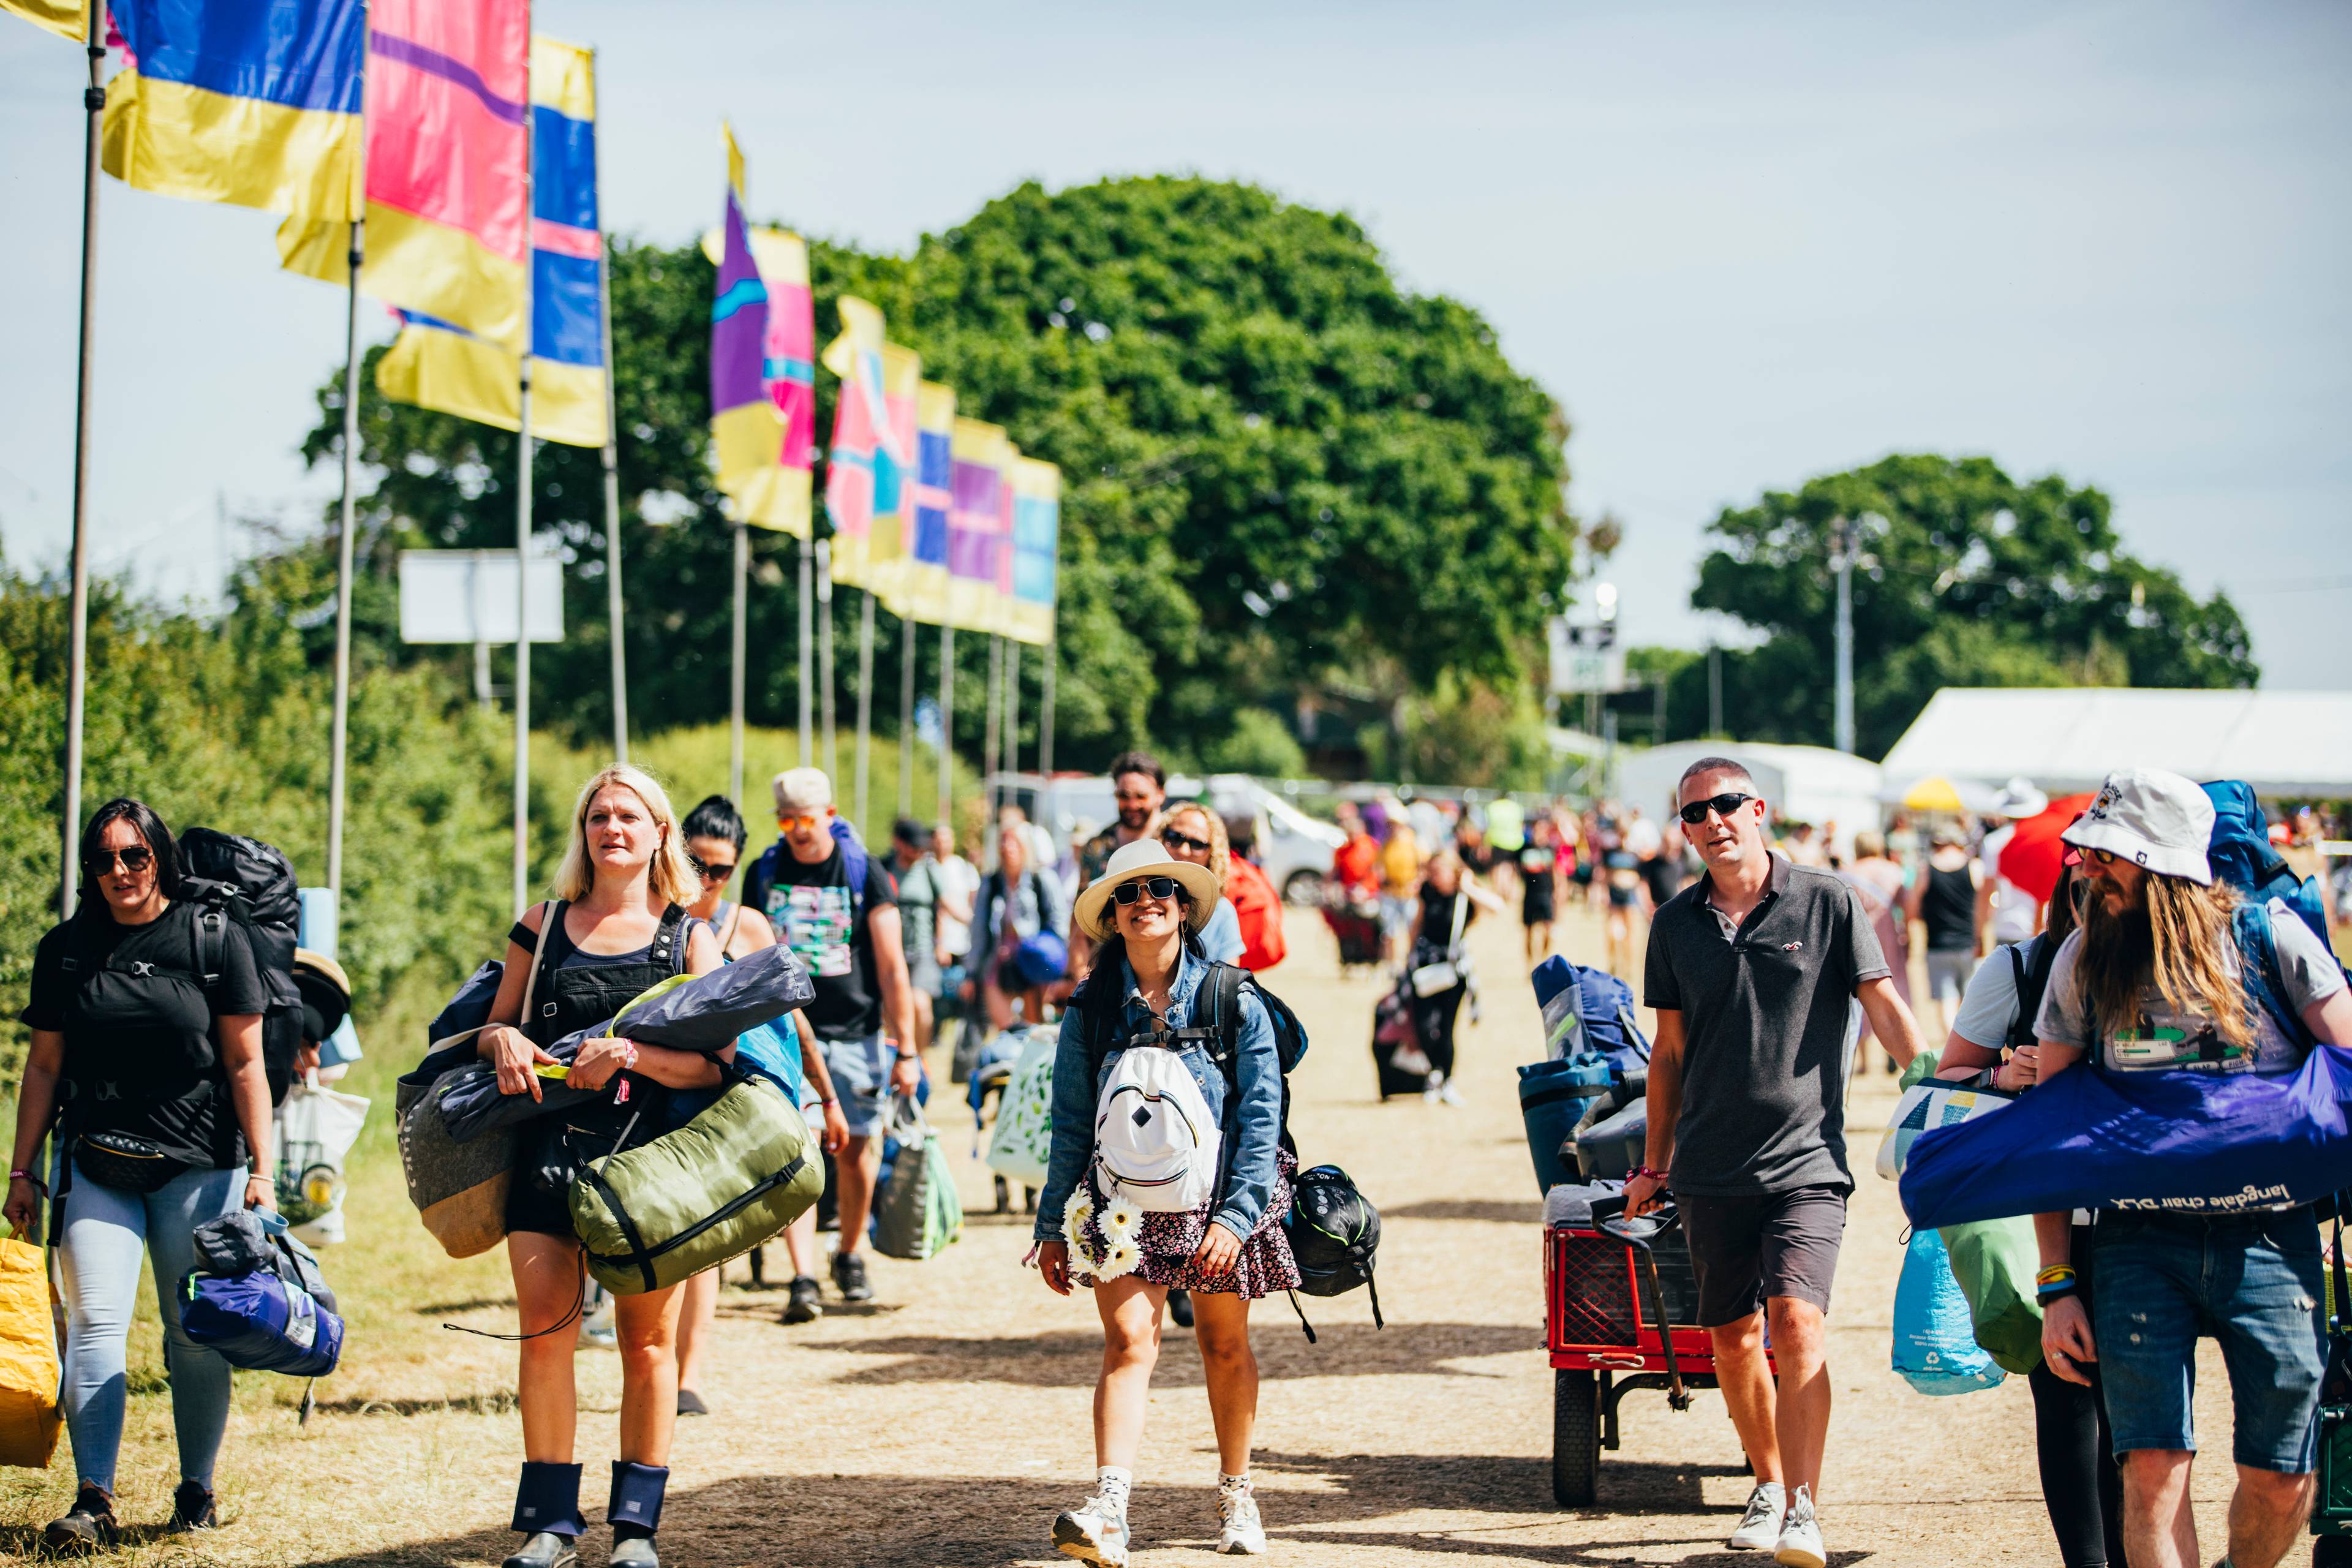 People walking with camping gear at a festival